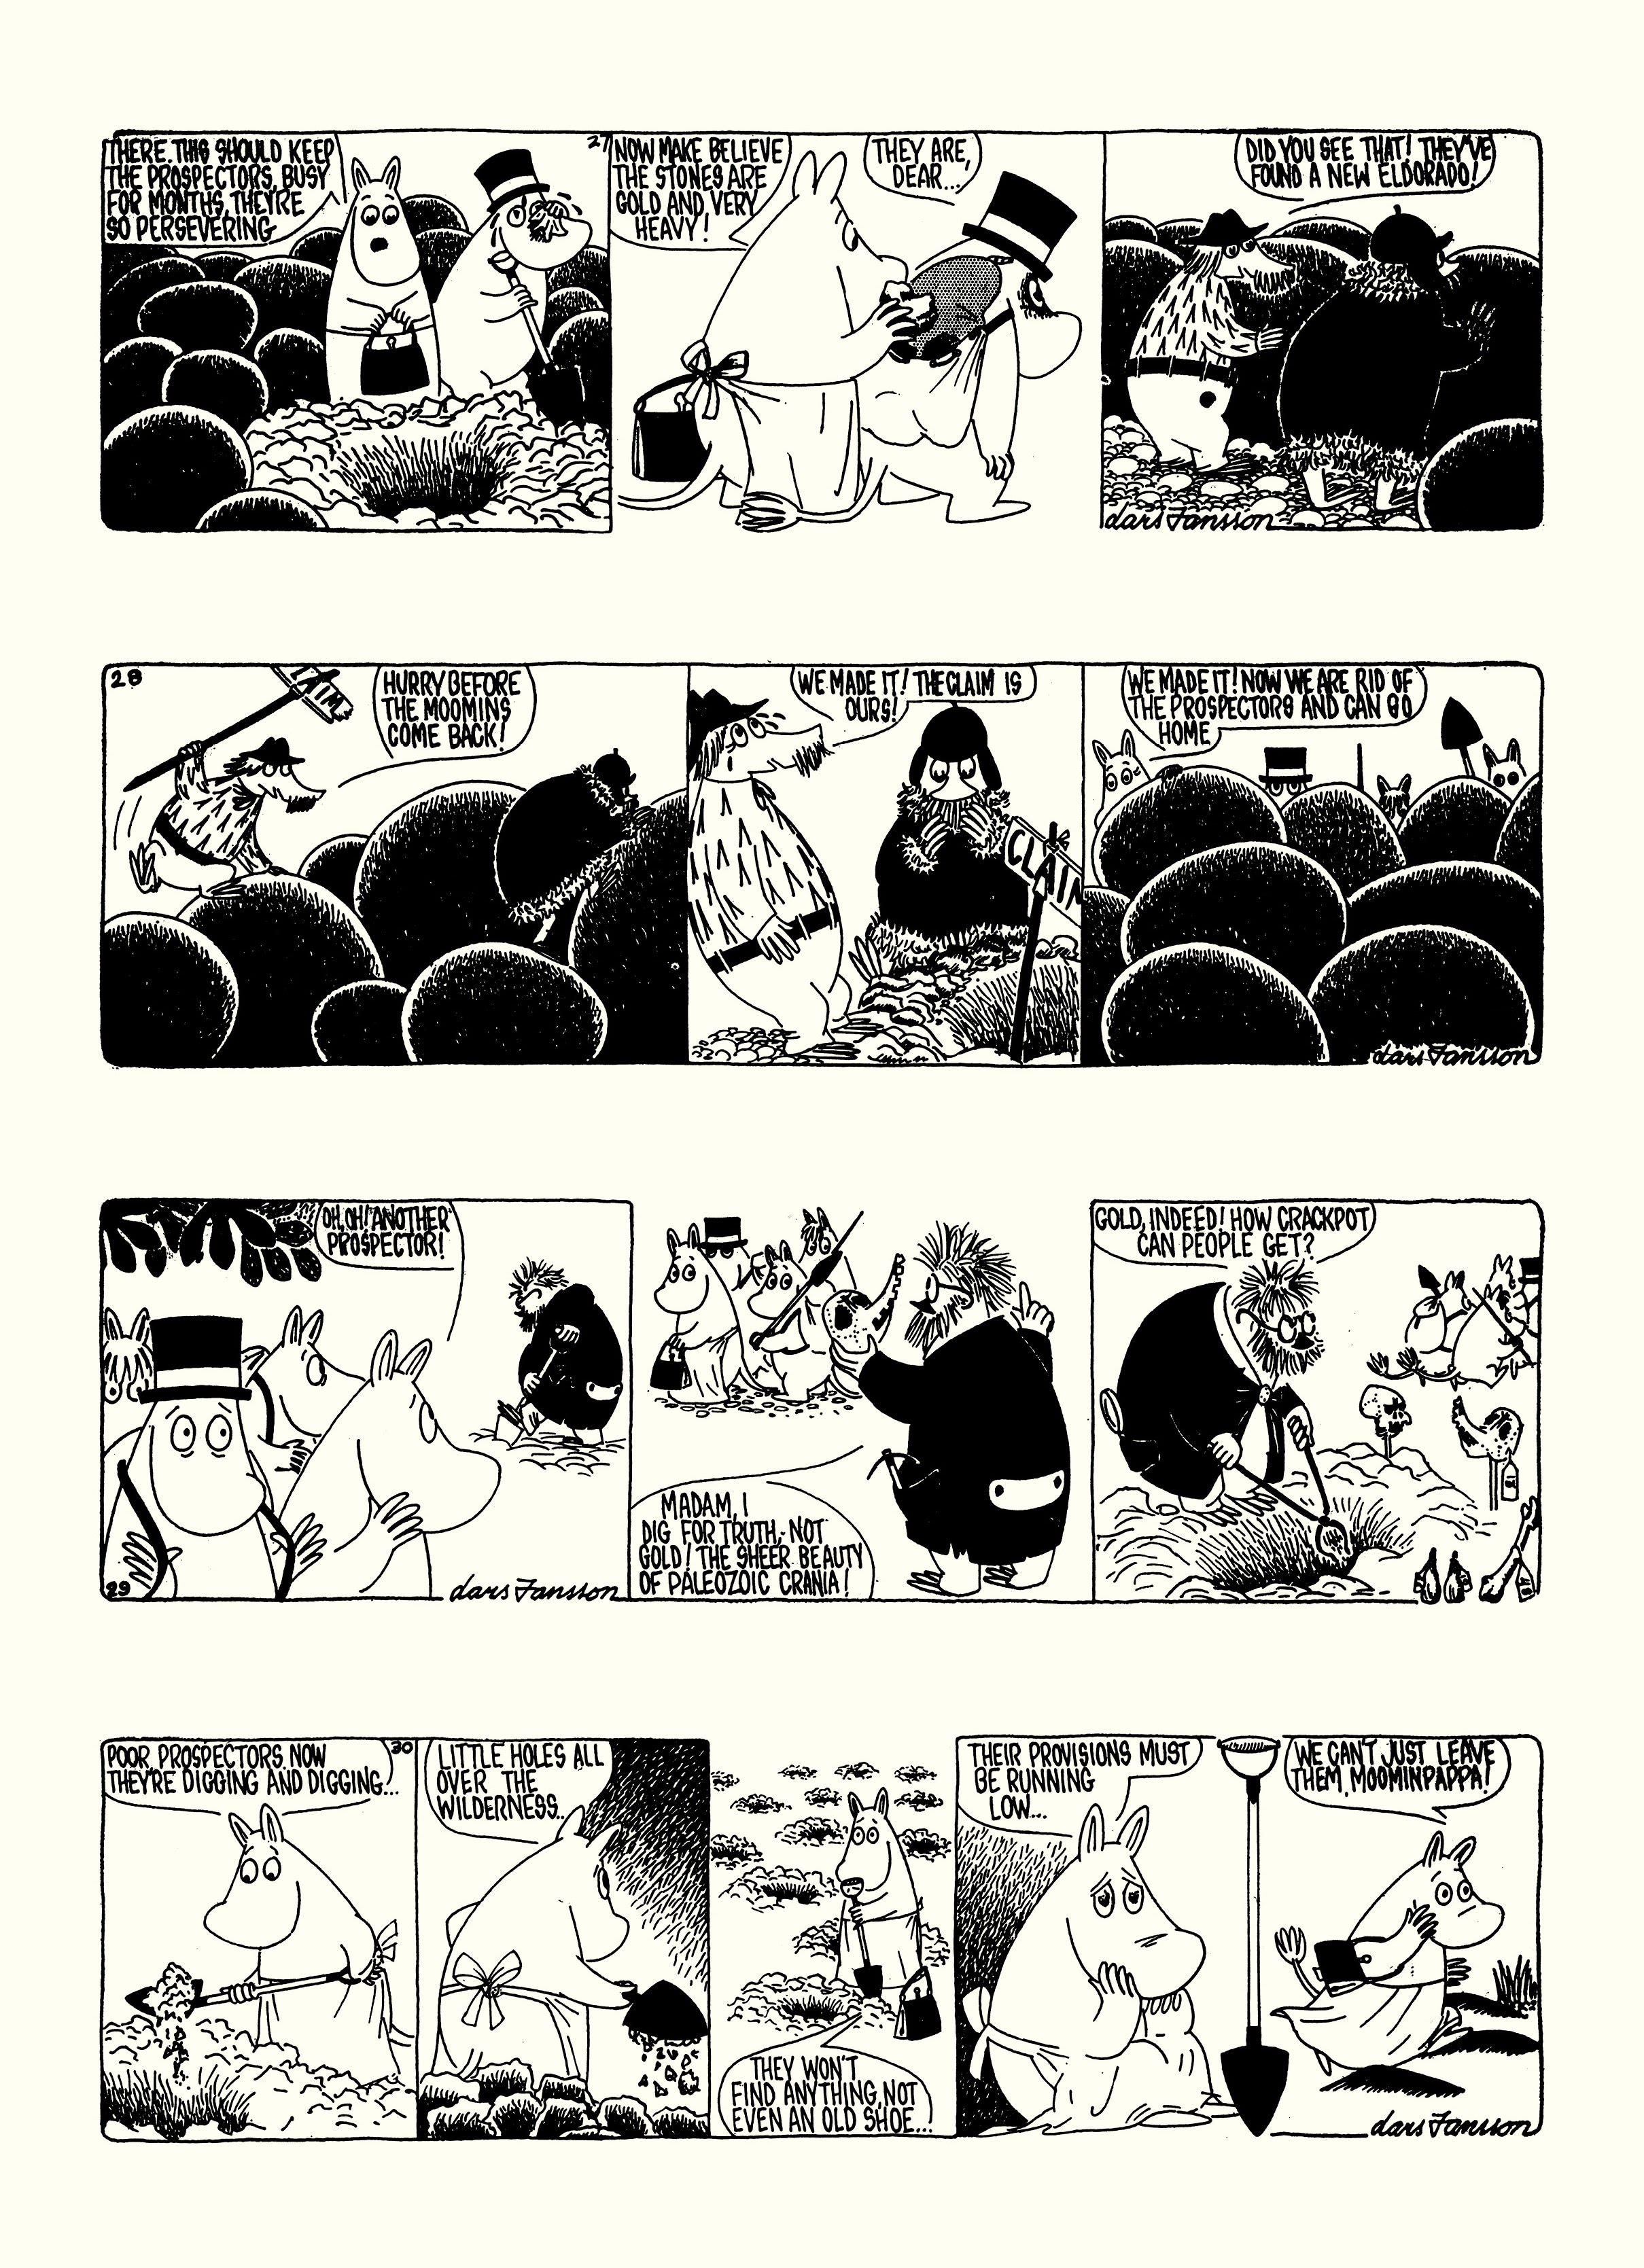 Read online Moomin: The Complete Lars Jansson Comic Strip comic -  Issue # TPB 7 - 76